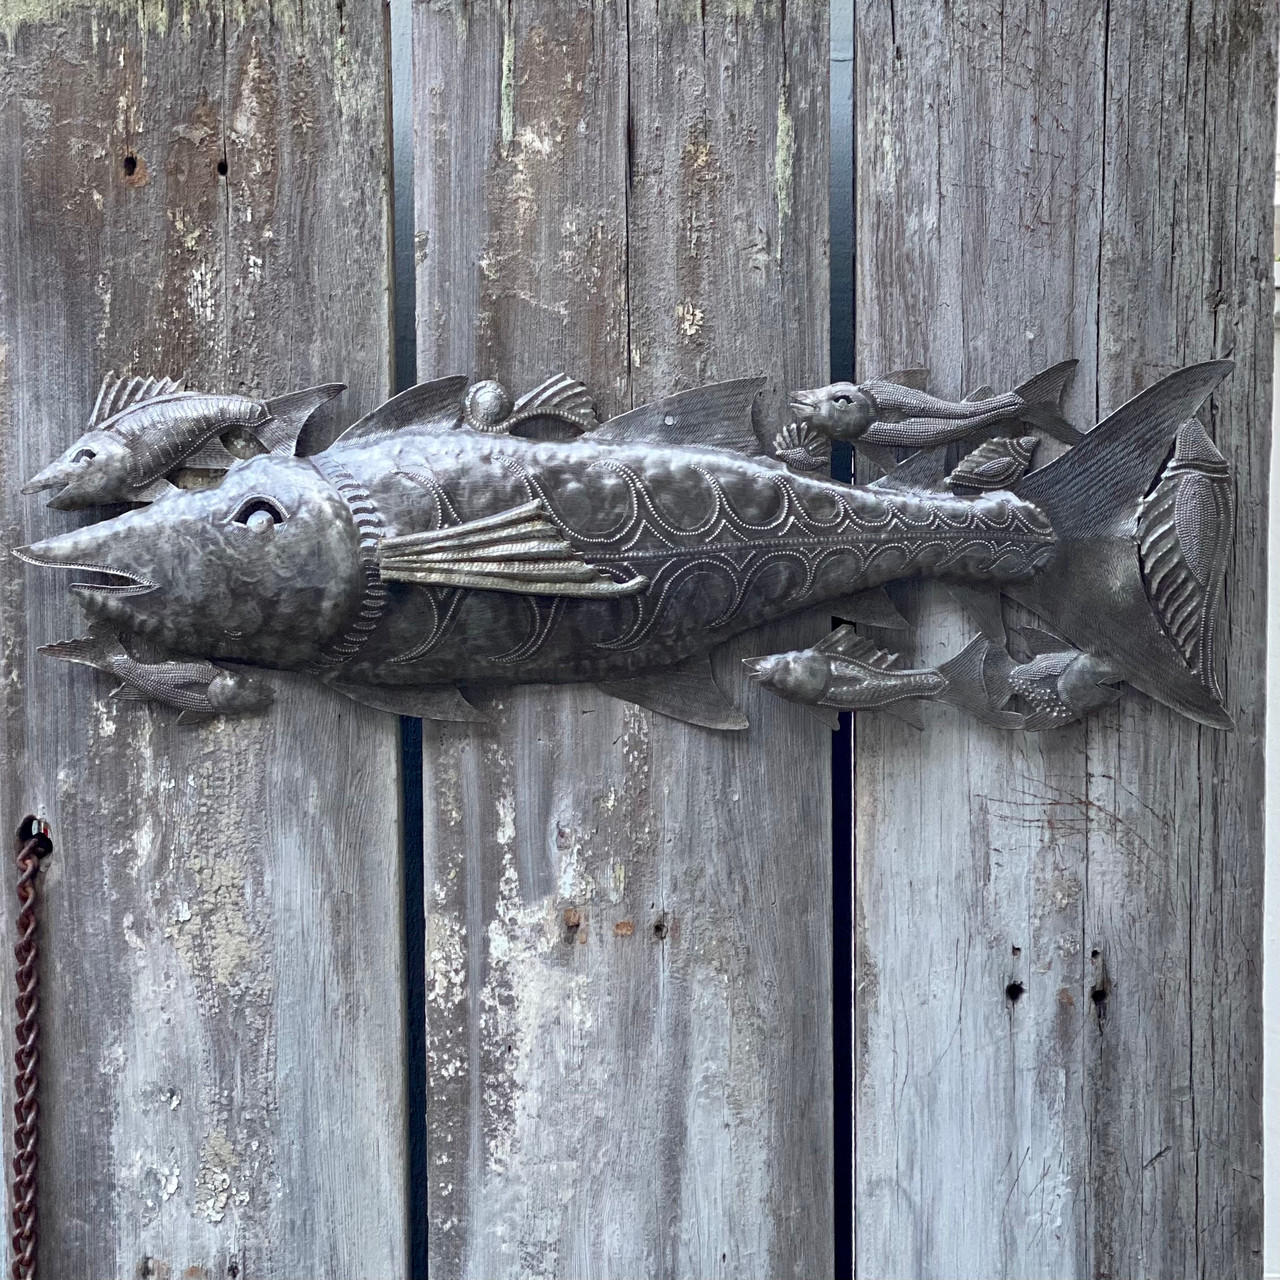 Large Fish, Metal Wall Hanging Artwork from Haiti, Sea Life Home Decorations, Haitian Art, 33.5 x 10 Inches